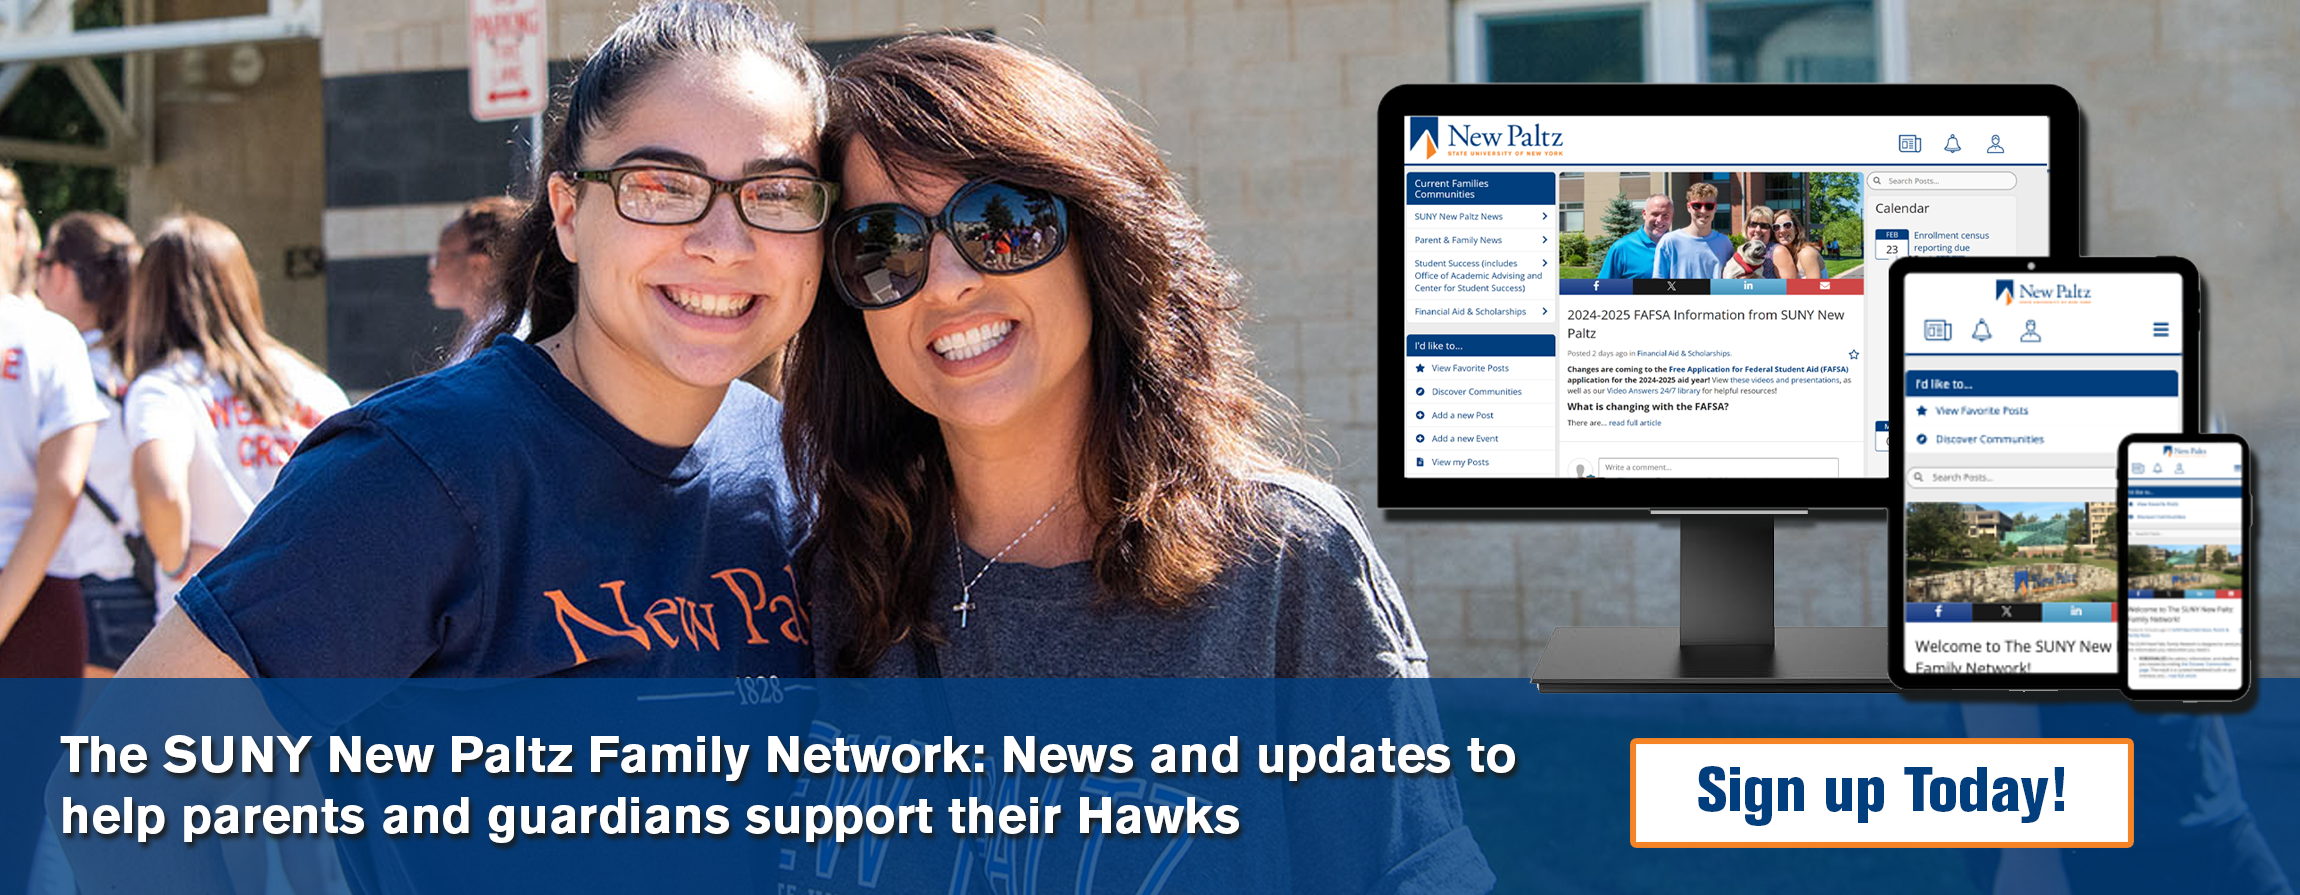 The SUNY New Paltz Family Network: News and updates to help parents and guardians support their Hawks